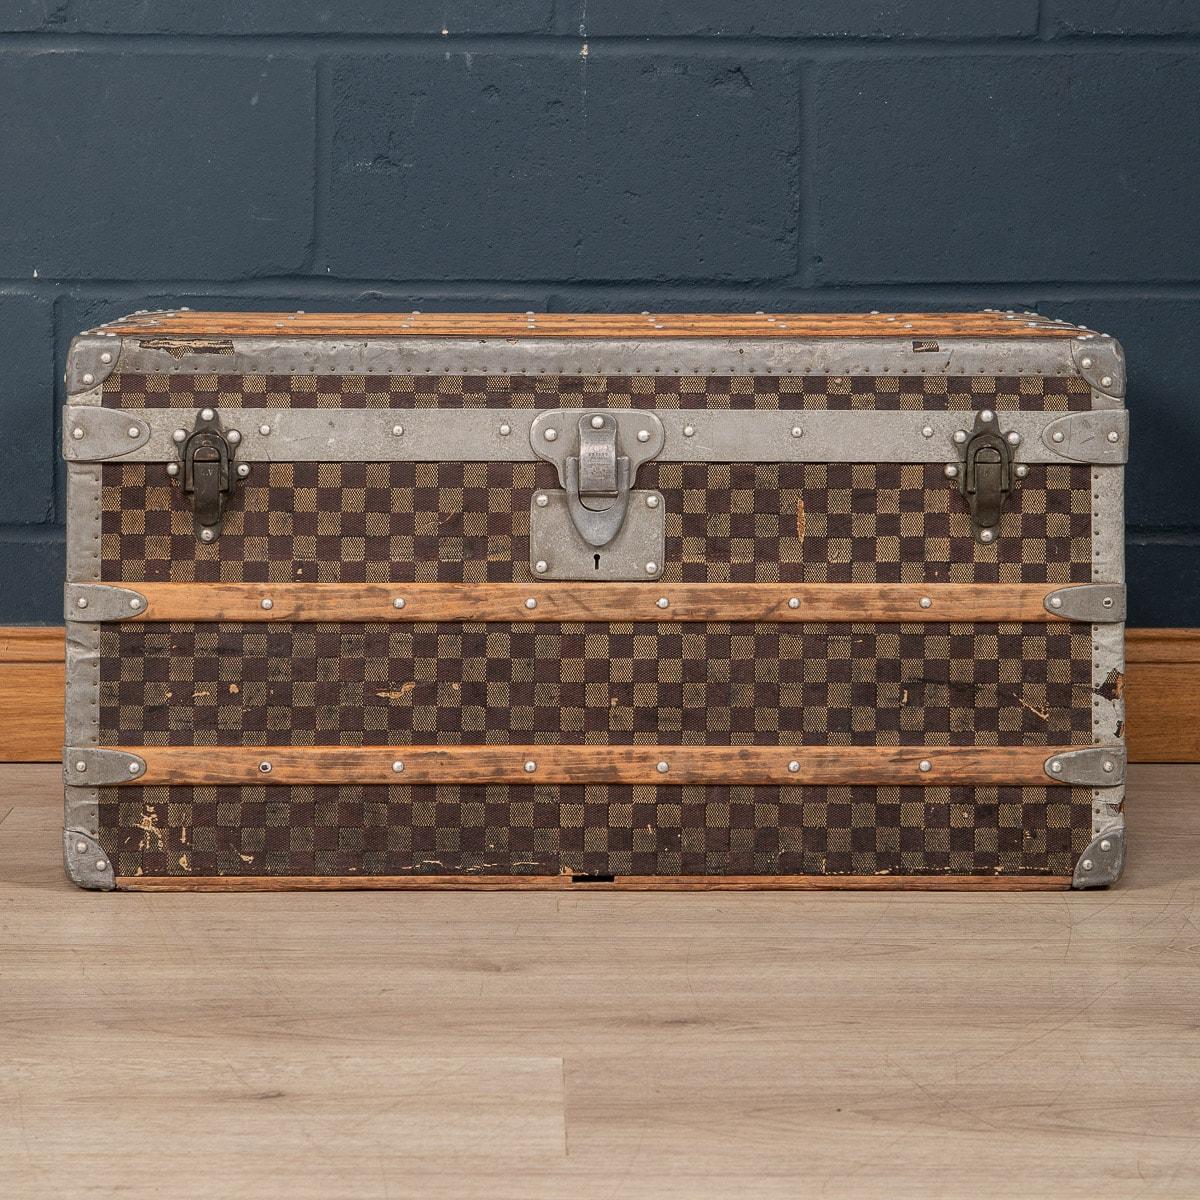 An extremely rare opportunity to own one of the rarest Louis Vuitton trunks ever made. One of the characteristics of Louis Vuitton as a trunk maker in the late 19th century and early 20th century was the willingness to use innovative materials in